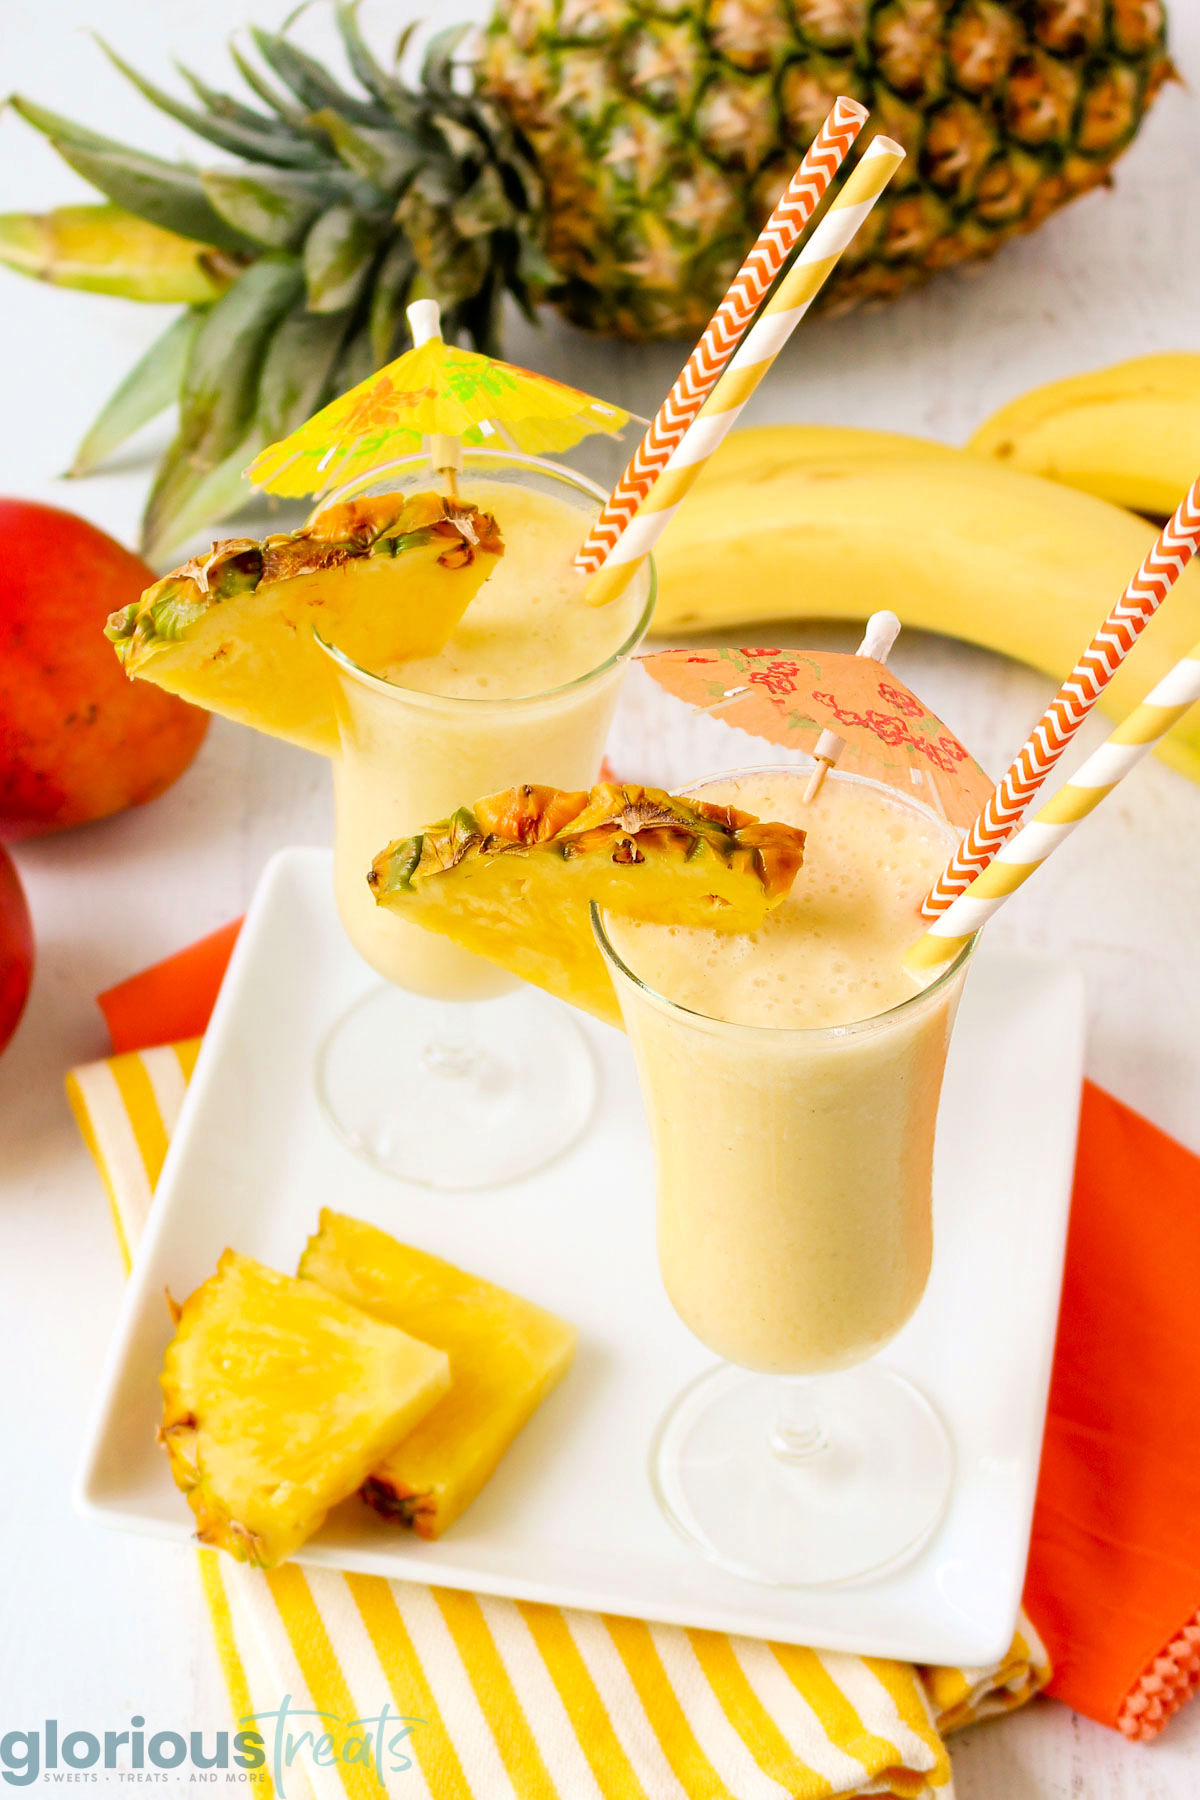 angled look down at two tall glasses filled with a tropical smoothie recipe sitting on a white tray garnished with wedges of pineapple. A whole pineapple and bananas can be seen in the background.